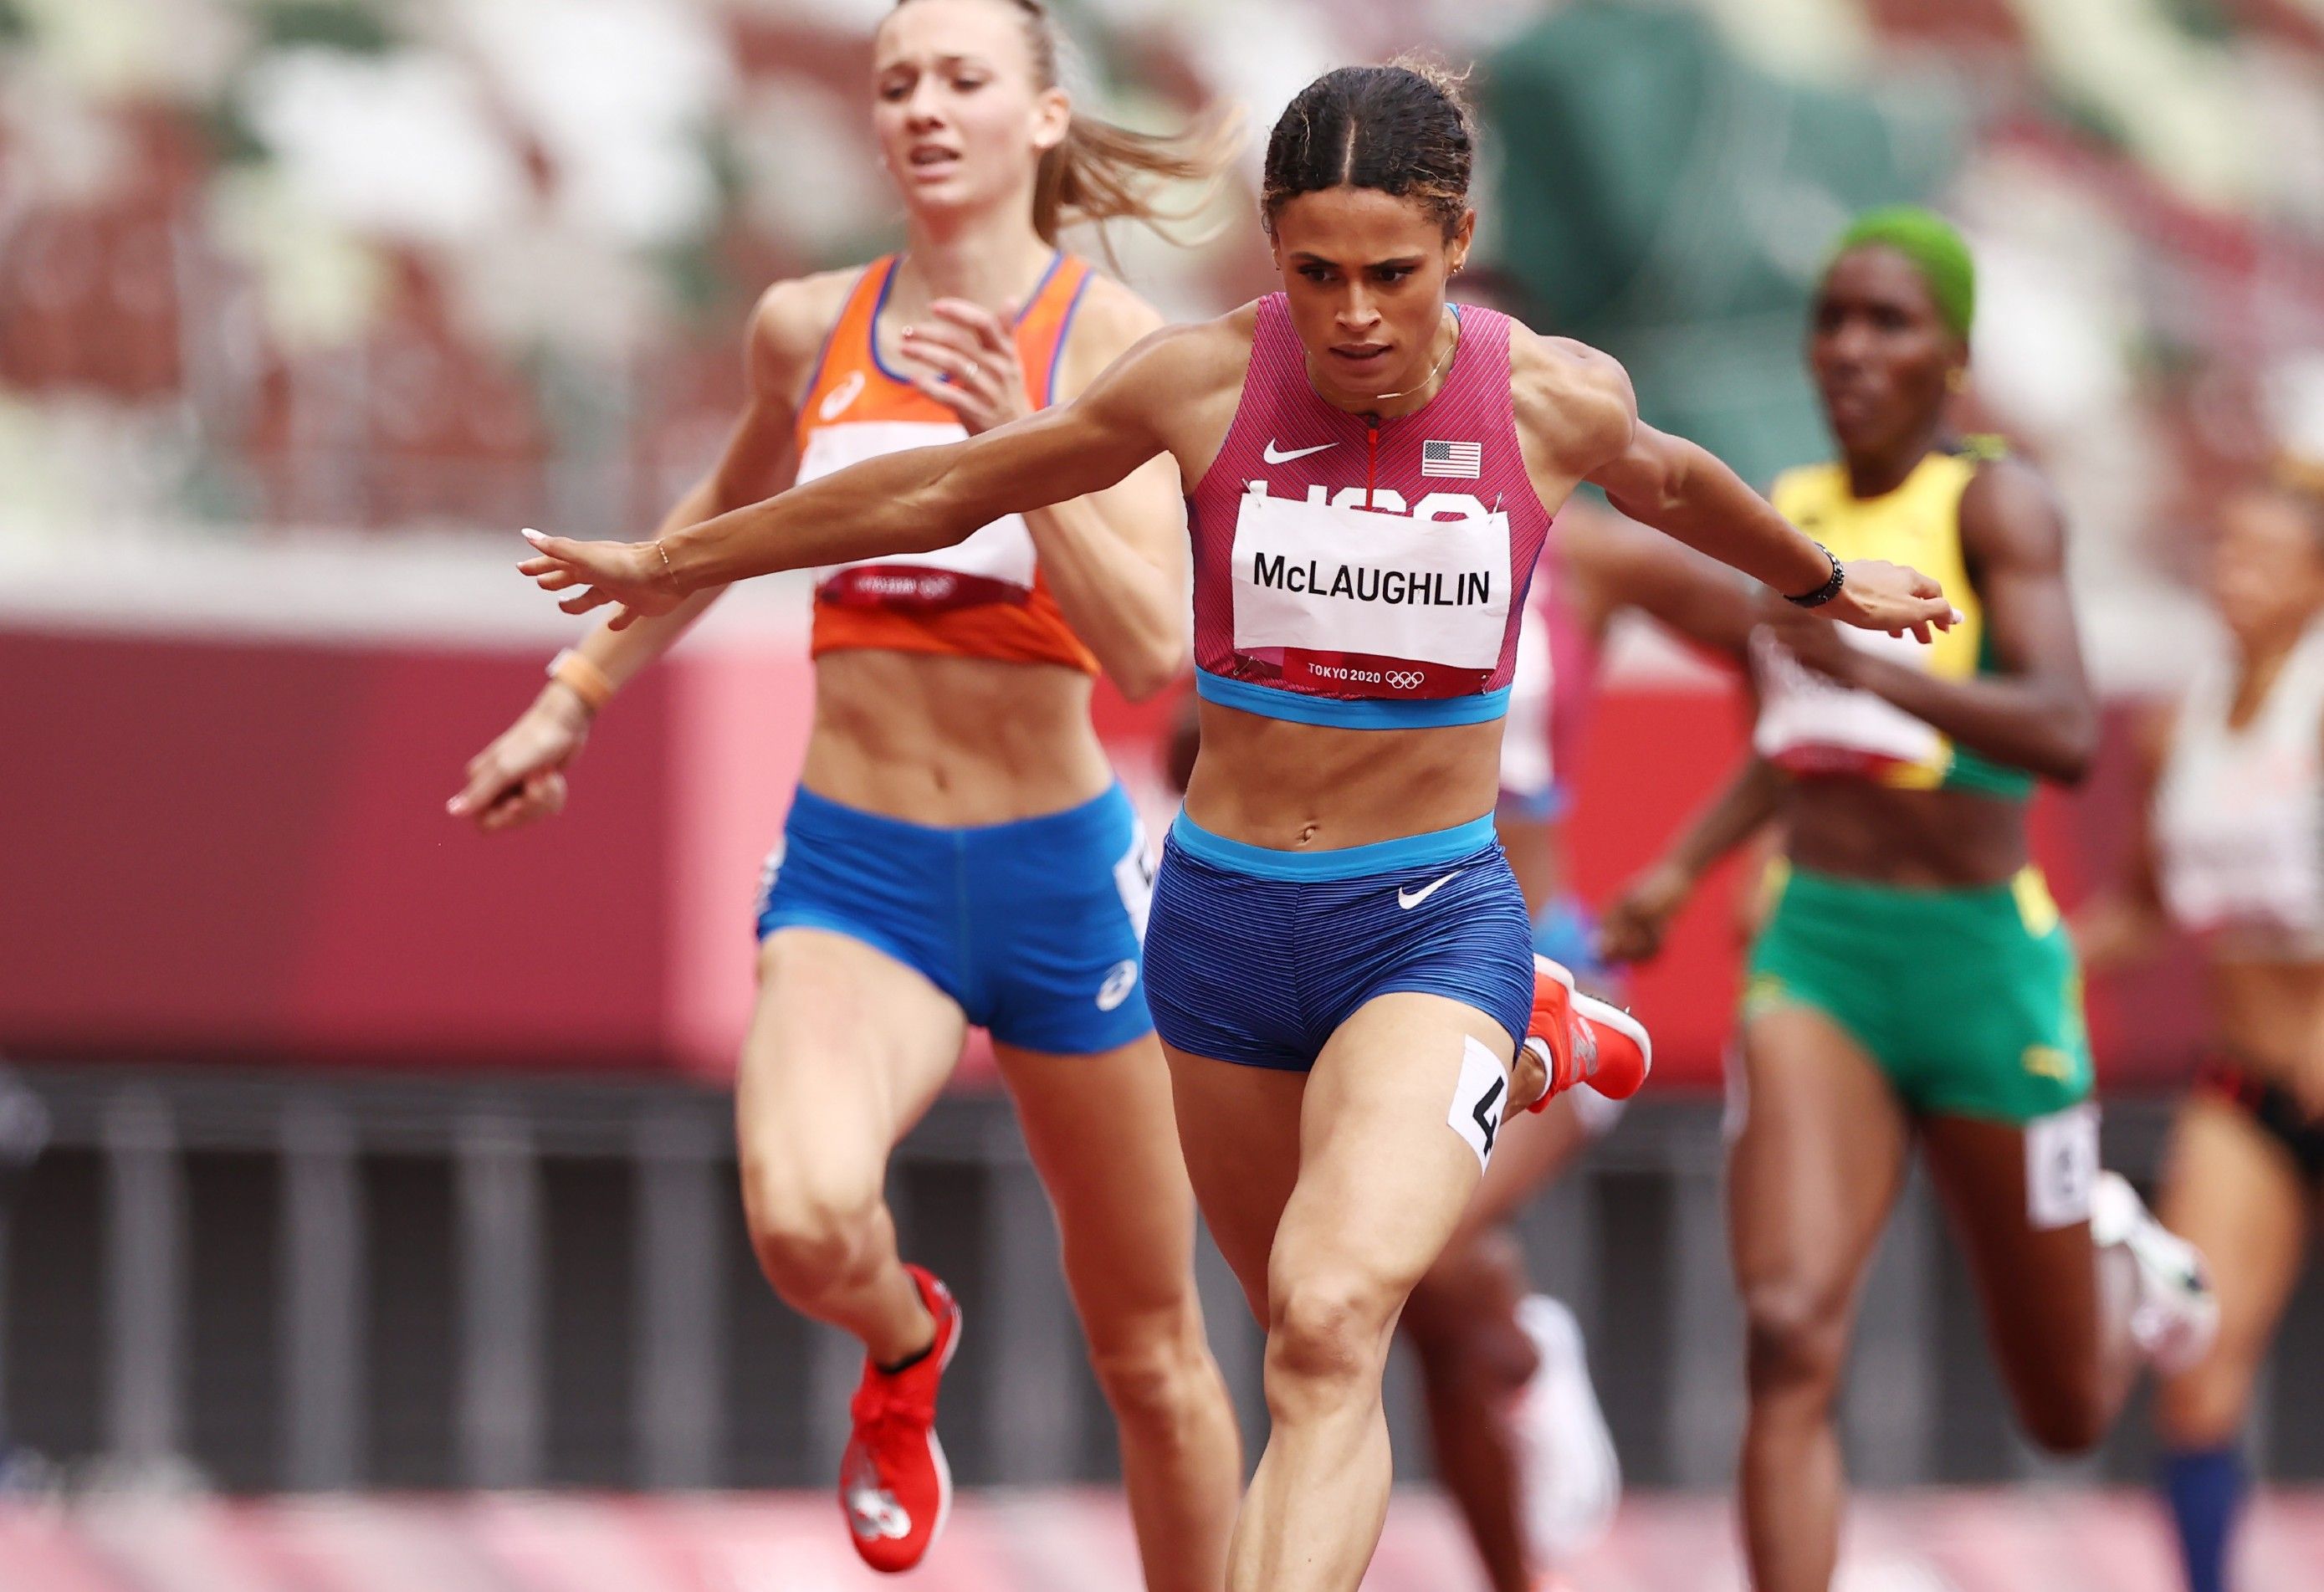 Sydney McLaughlin breaks the world 400m hurdles record to get Olympic gold in Tokyo